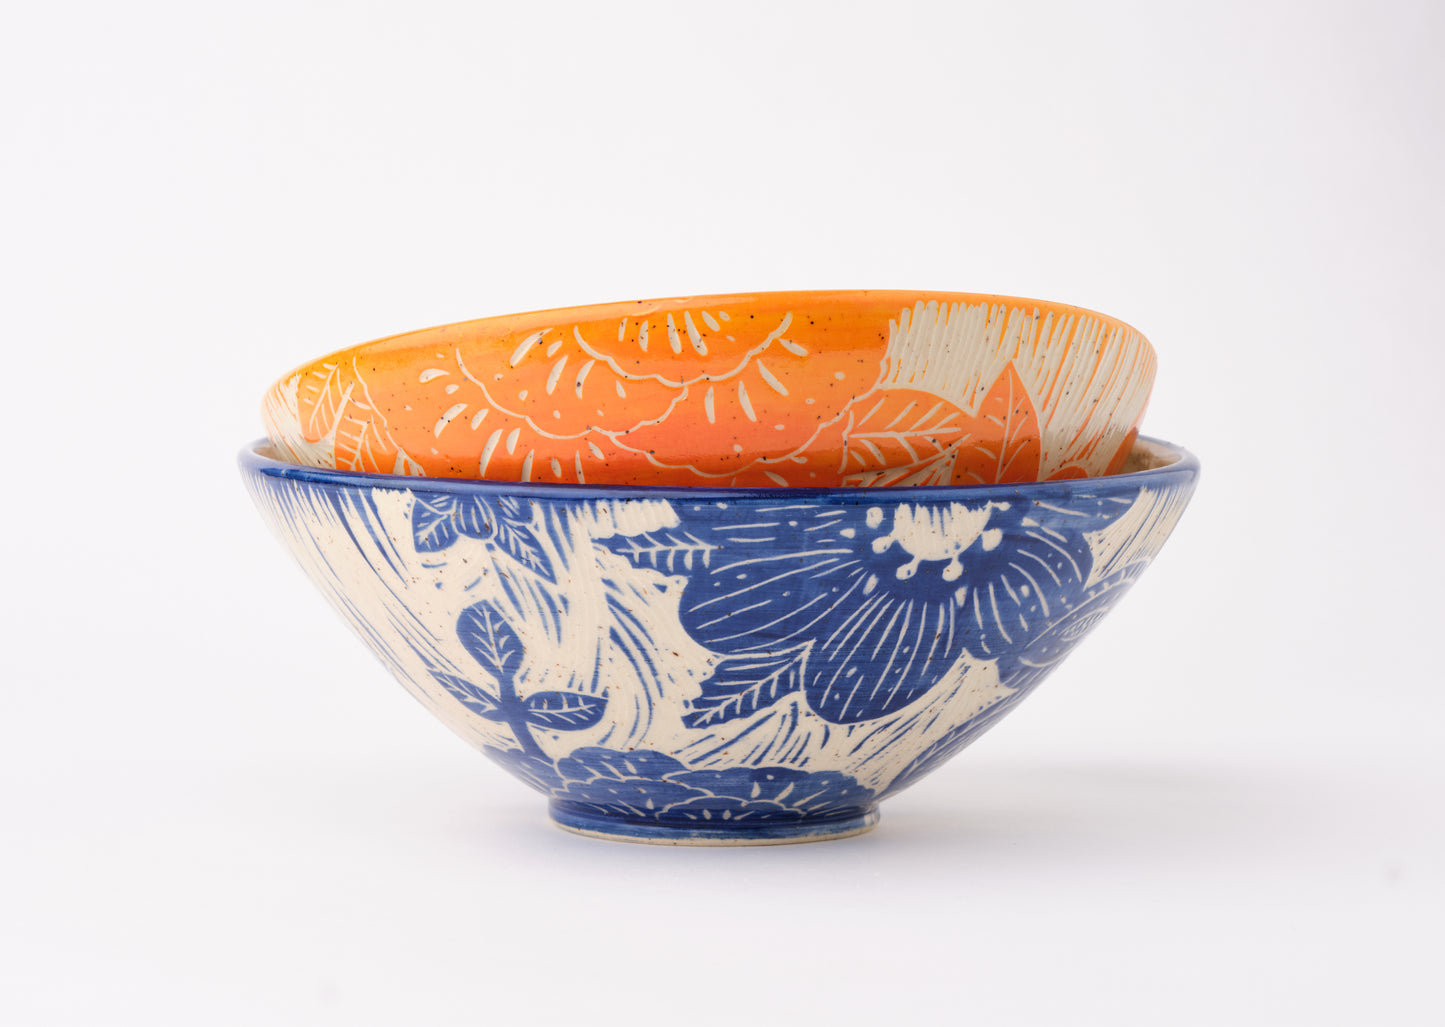 Serving Bowl with Orange Flowers